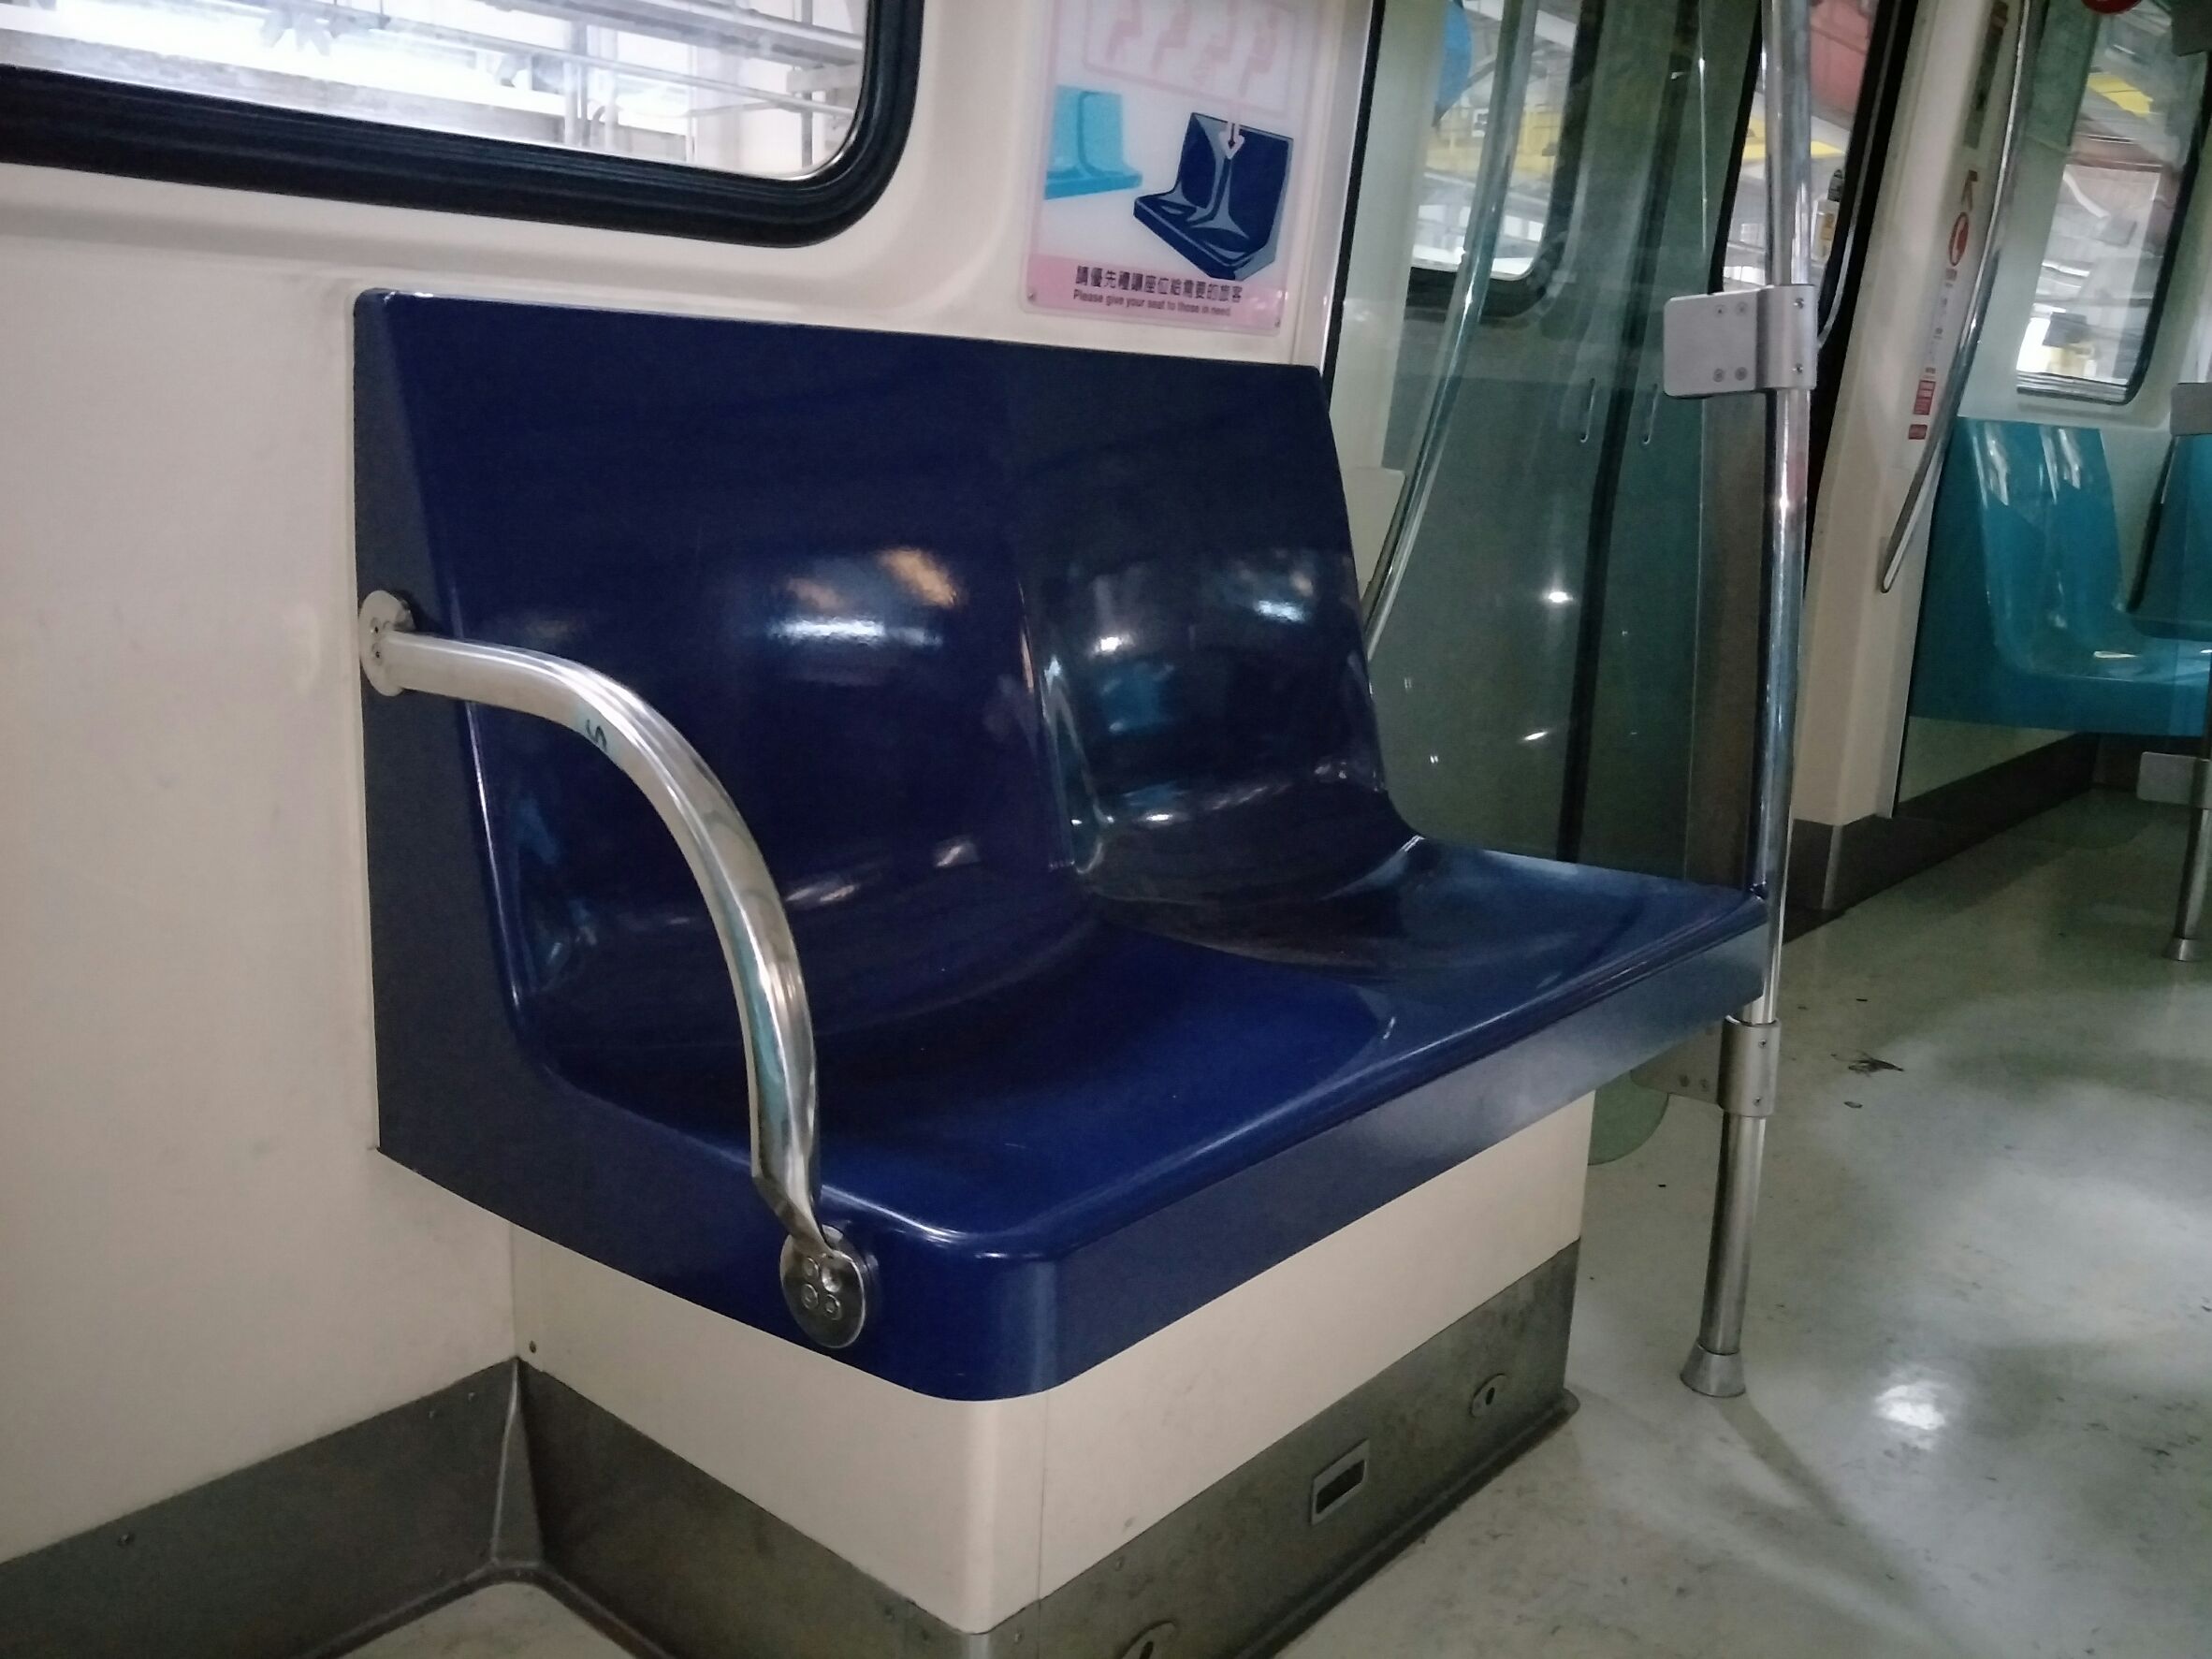 TRTC Adds Armrests to MRT Priority Seats to Improve Comfort and Safety